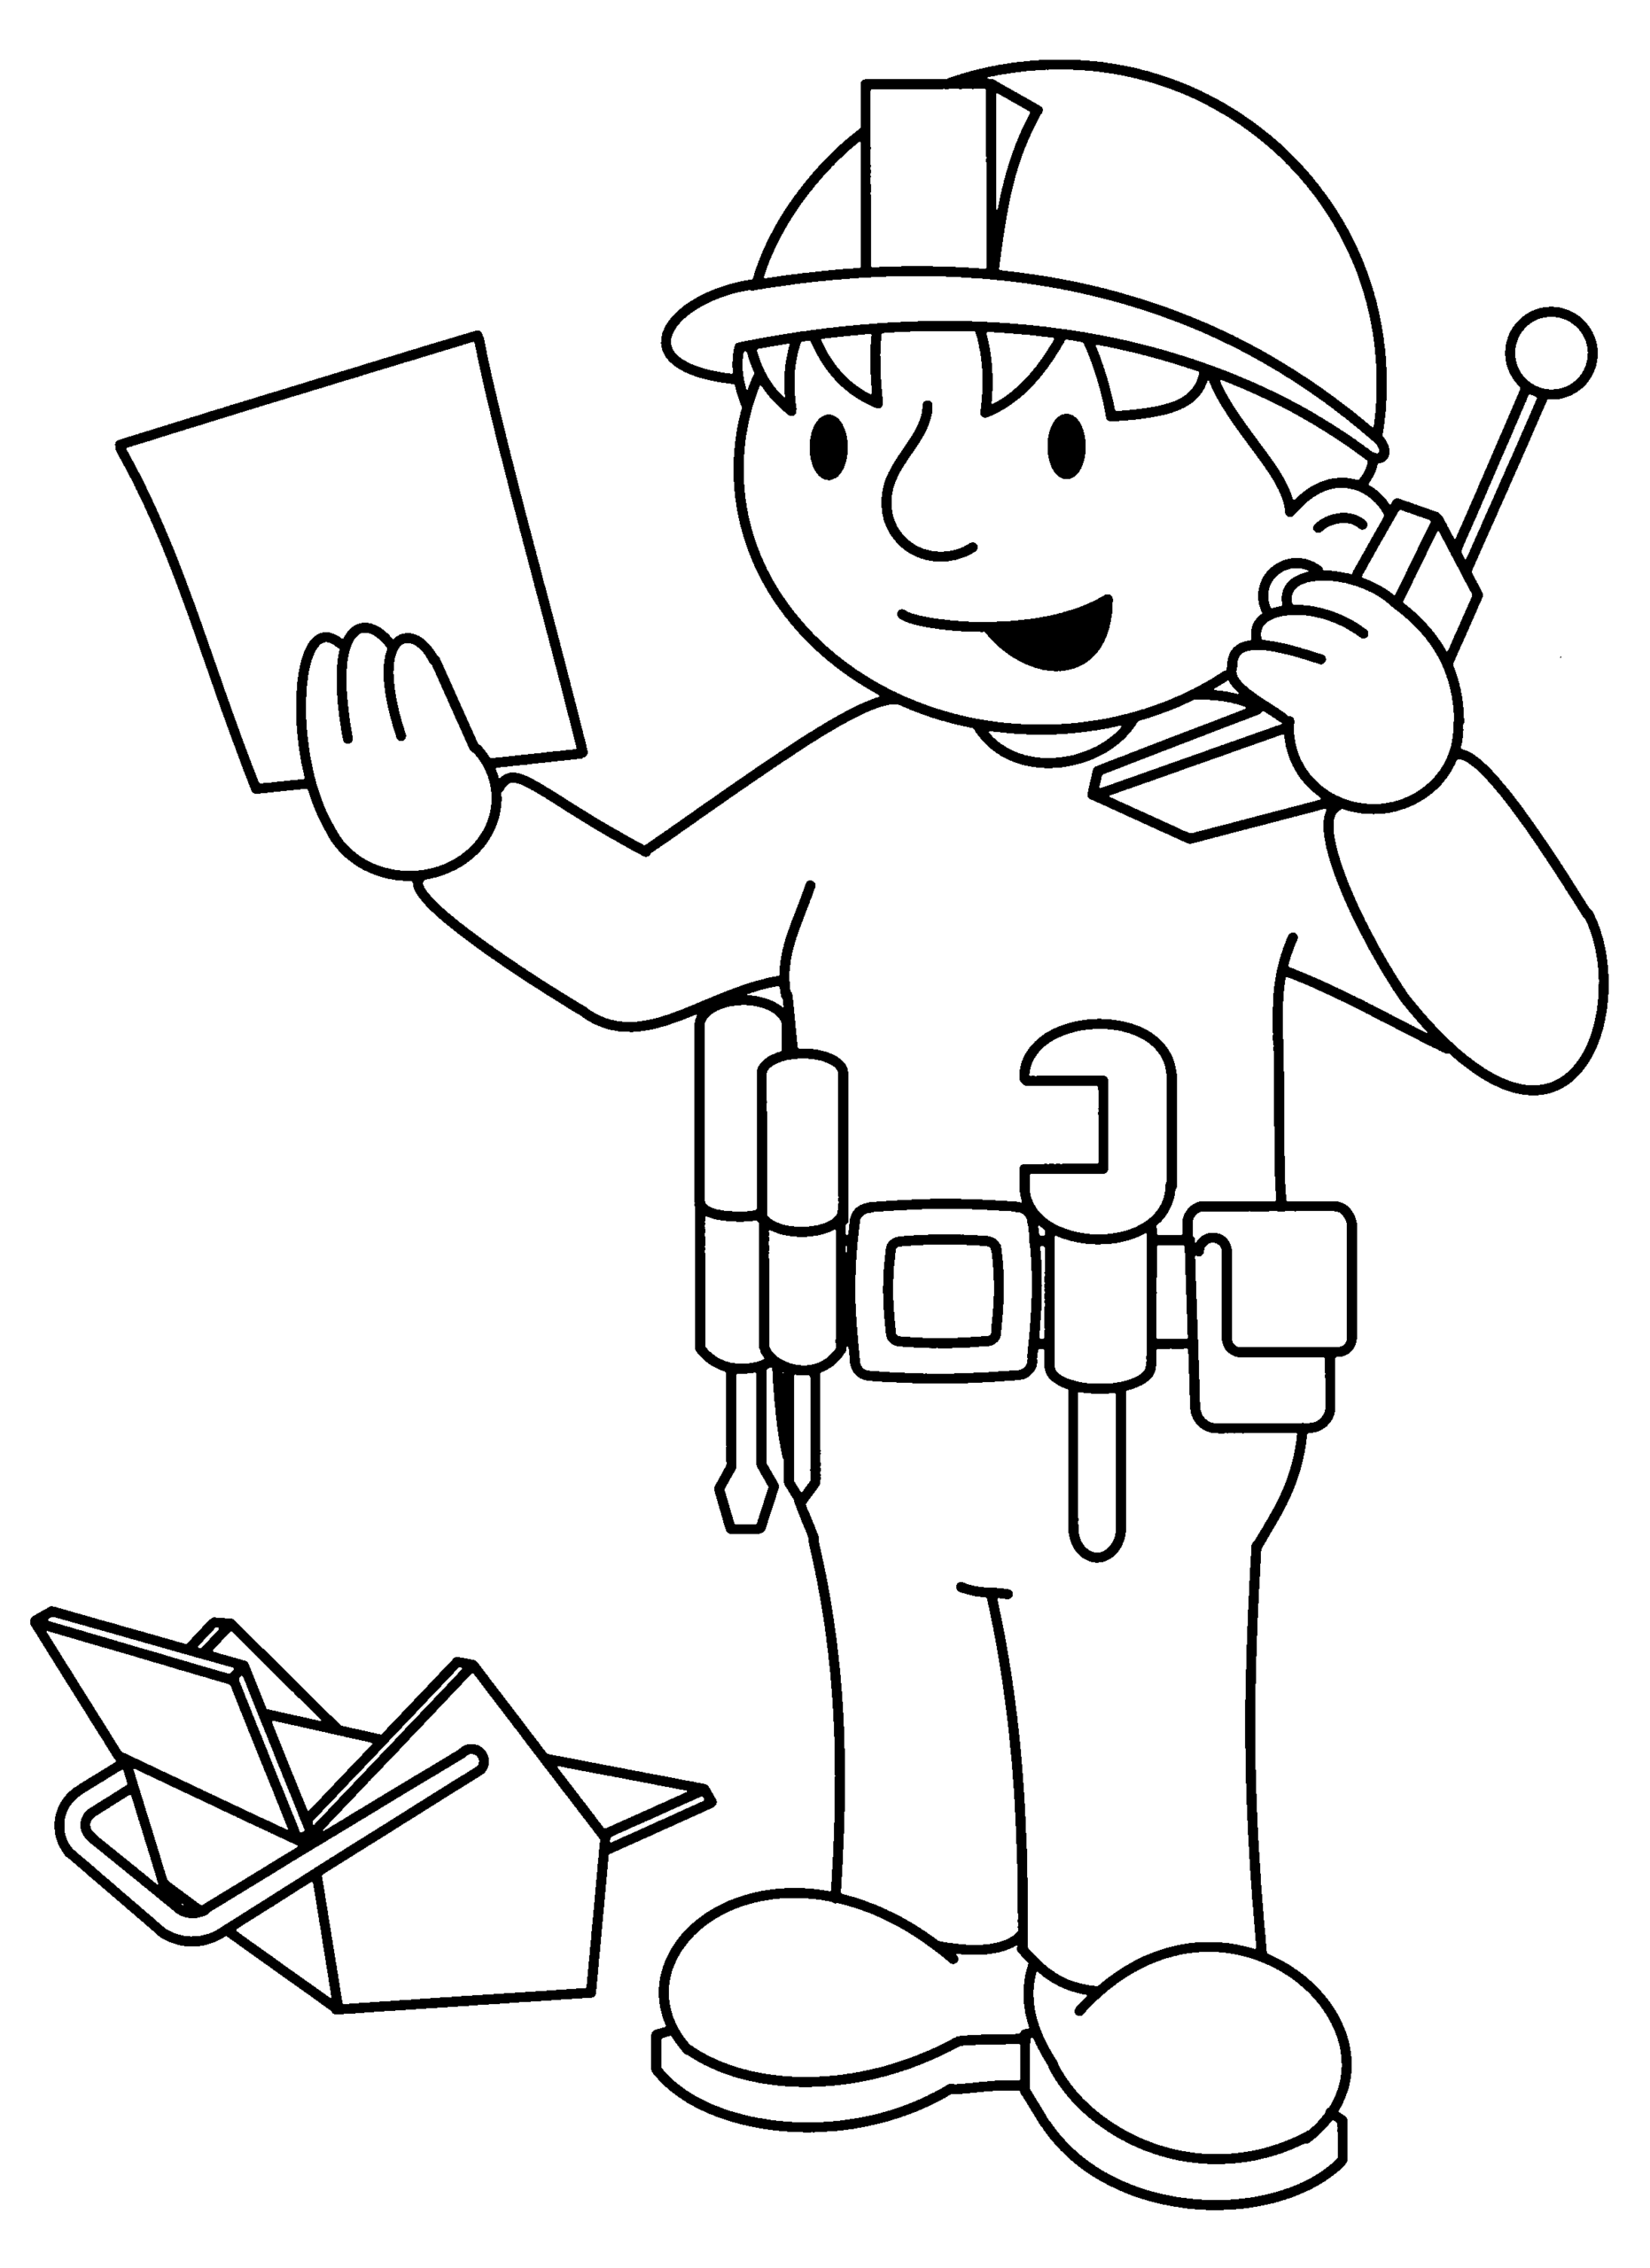 Bob the Builder Coloring Pages TV Film bob the builder 66 Printable 2020 01088 Coloring4free